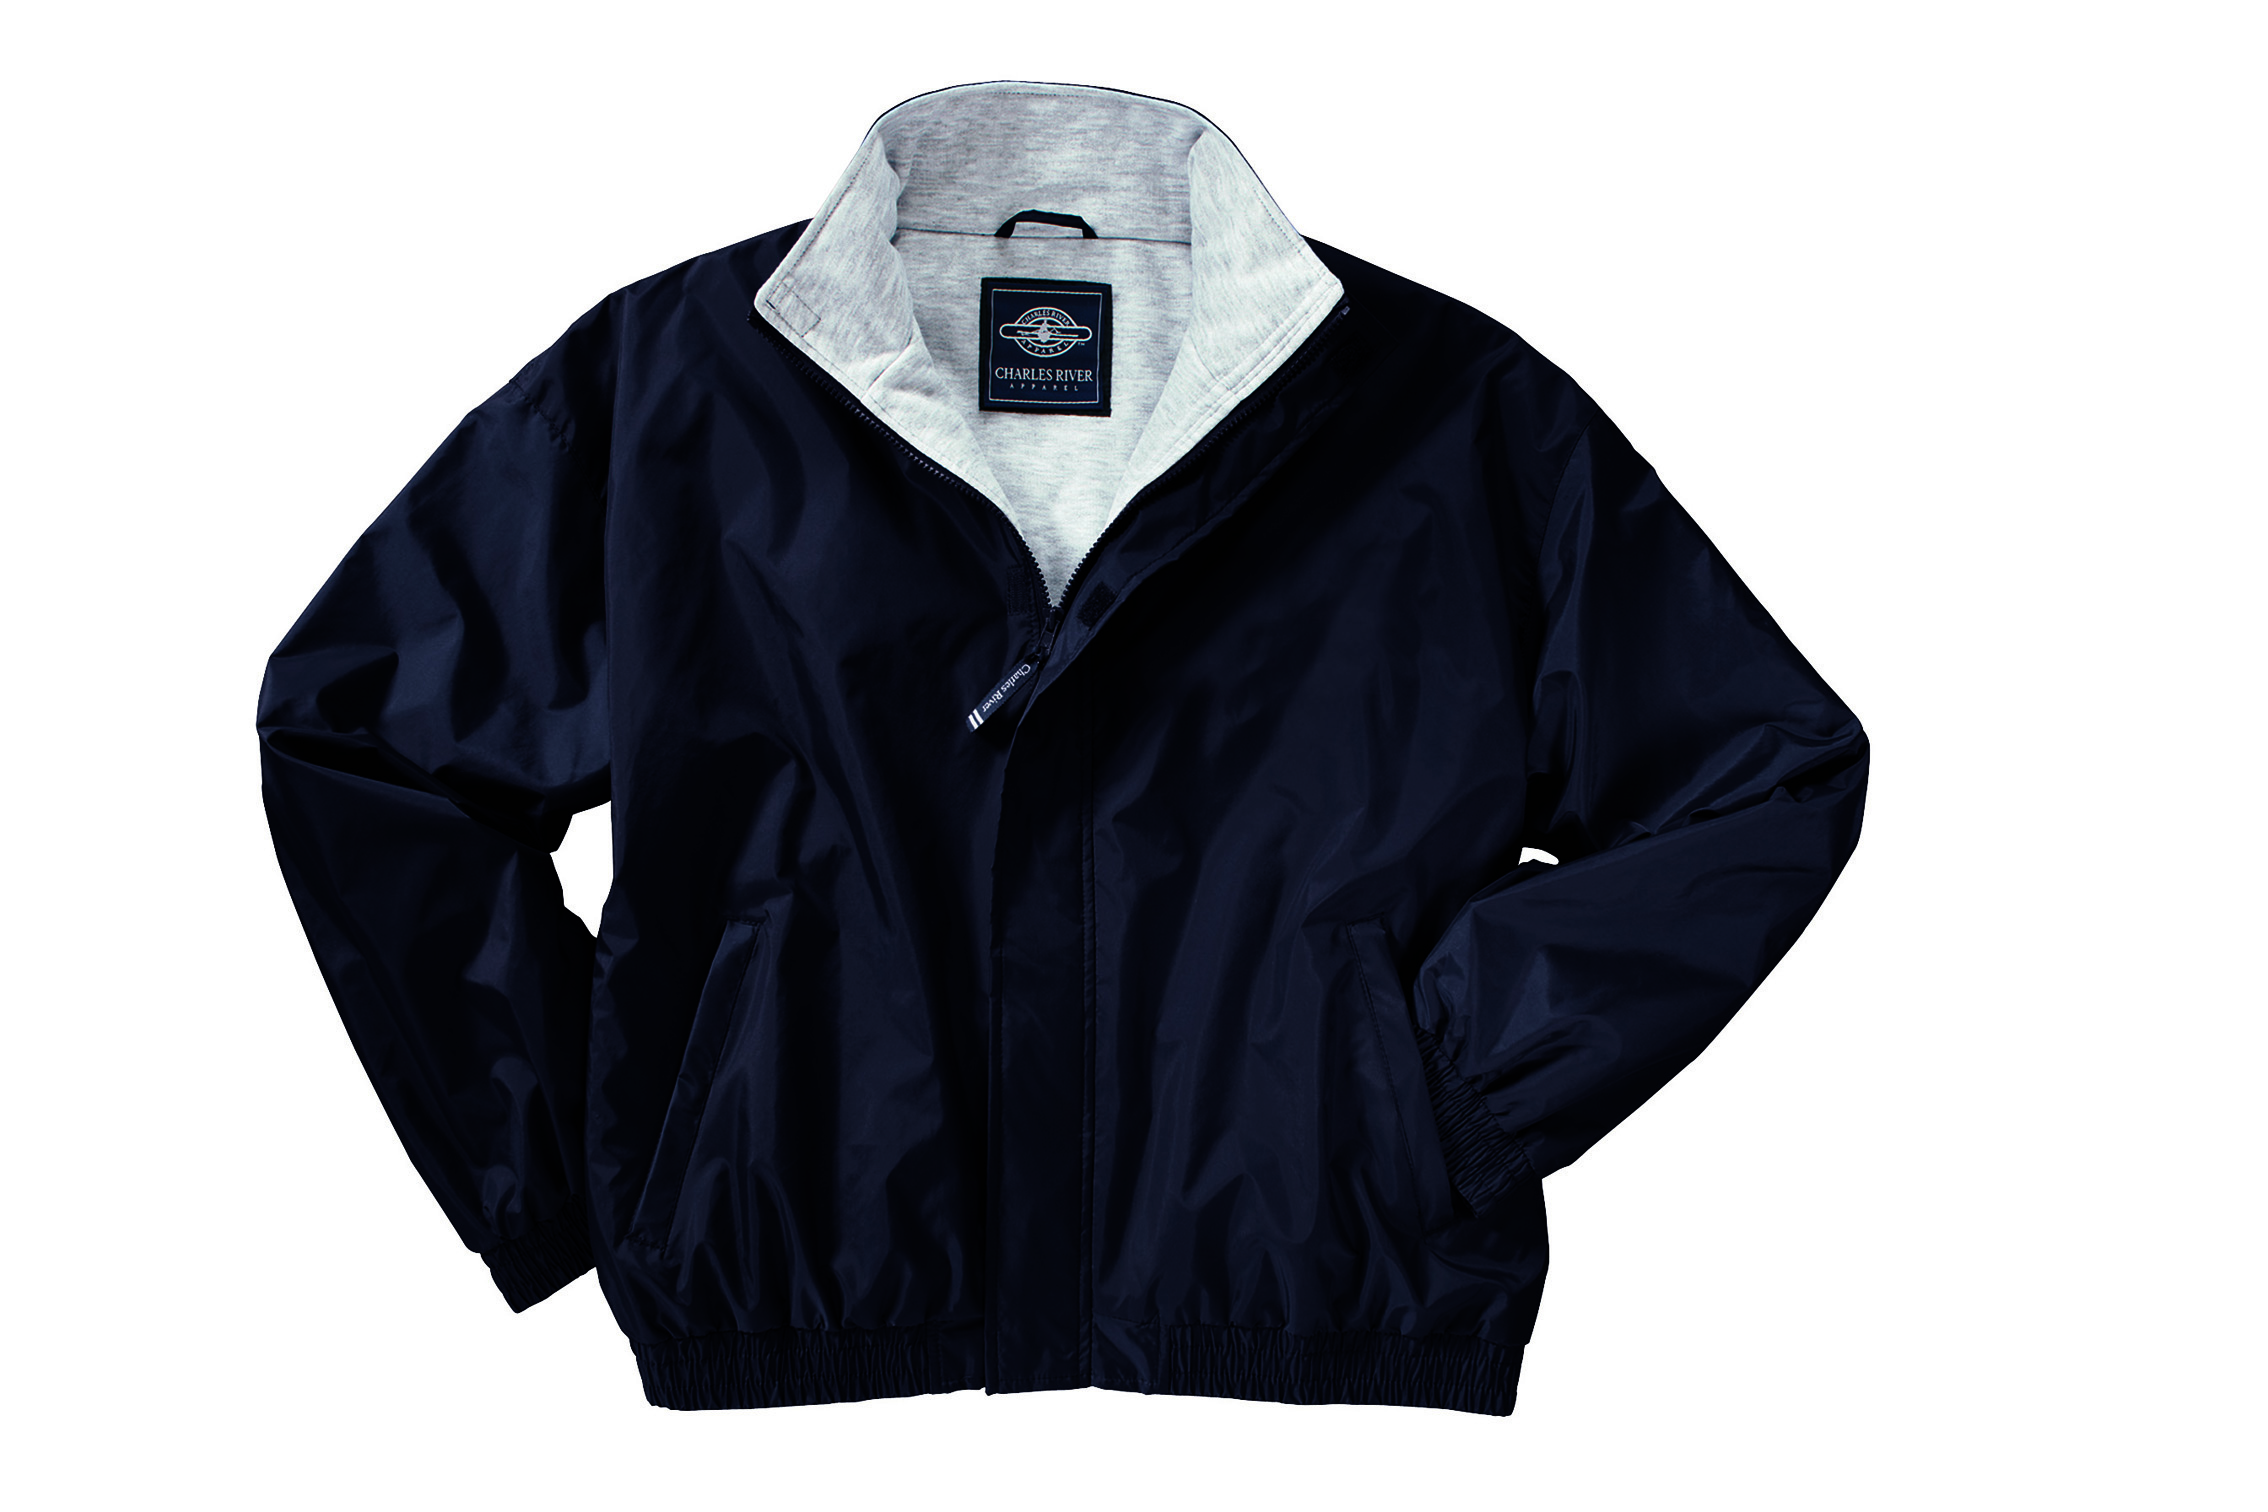 The "Performer Collection" Spectator Nylon Jacket from Charles River Apparel